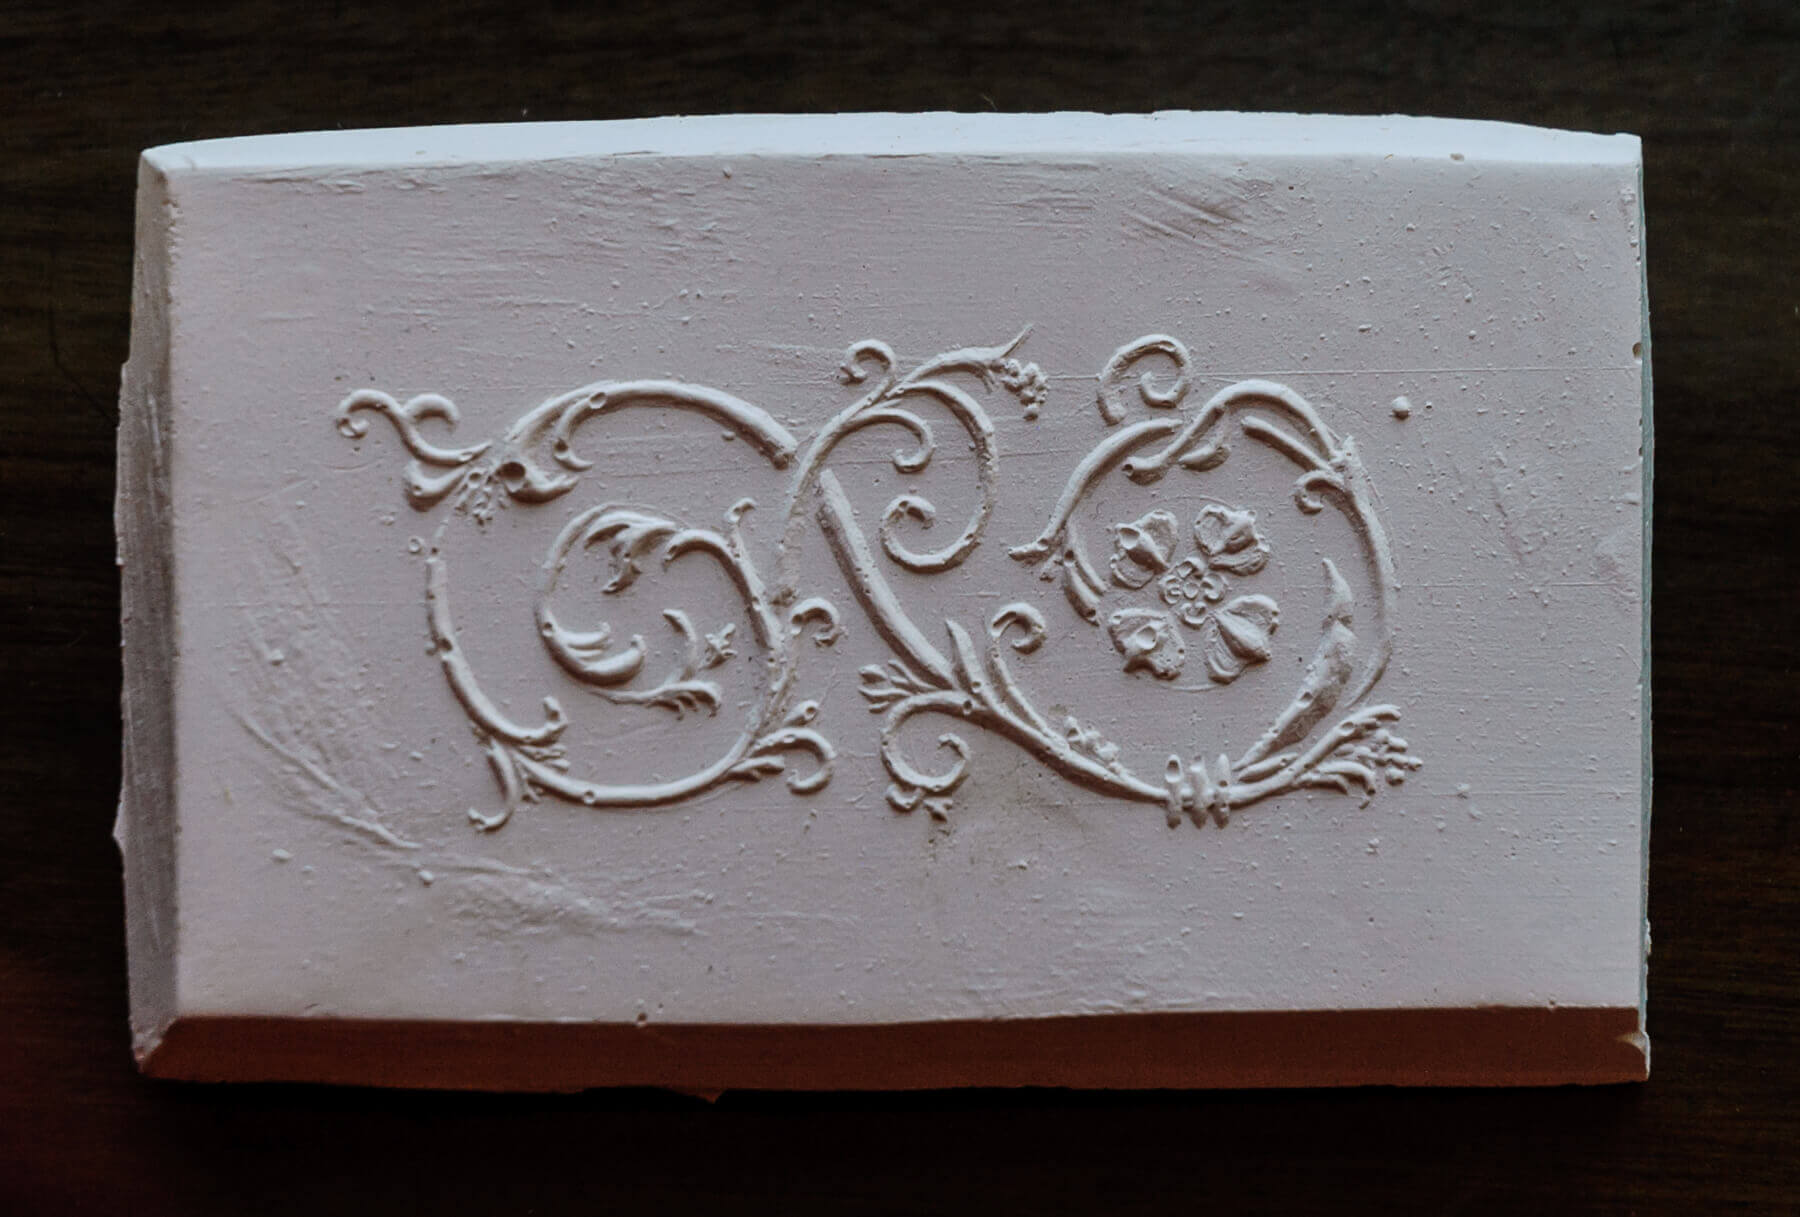 This is Ashton's plaster-positive made from his handmade motif for the face of the frame sides.